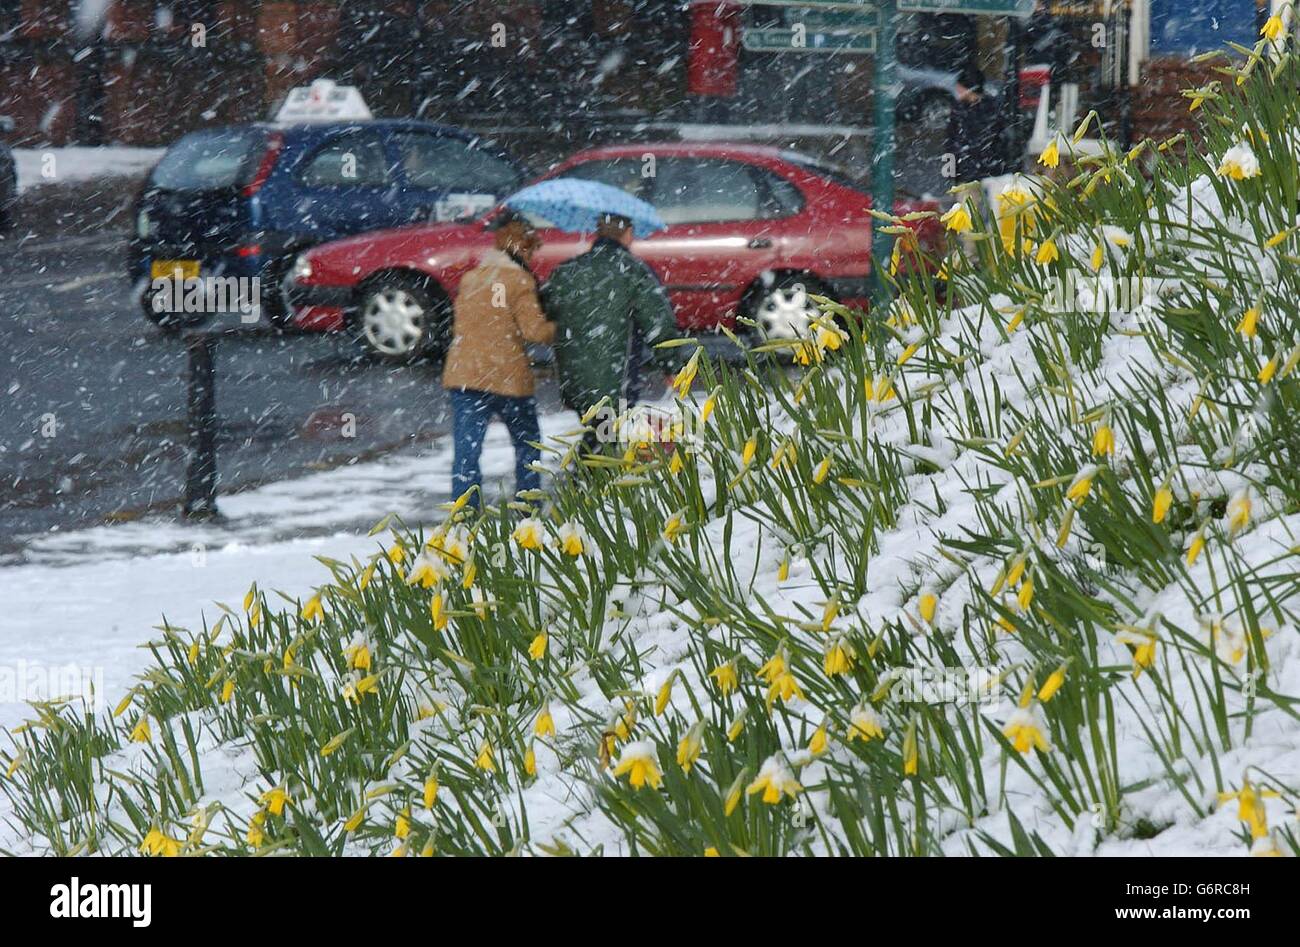 Spring daffodills covered by snow in York. Snow showers continue to fall in Eastern parts of the UK making it difficult for shoppers. Stock Photo